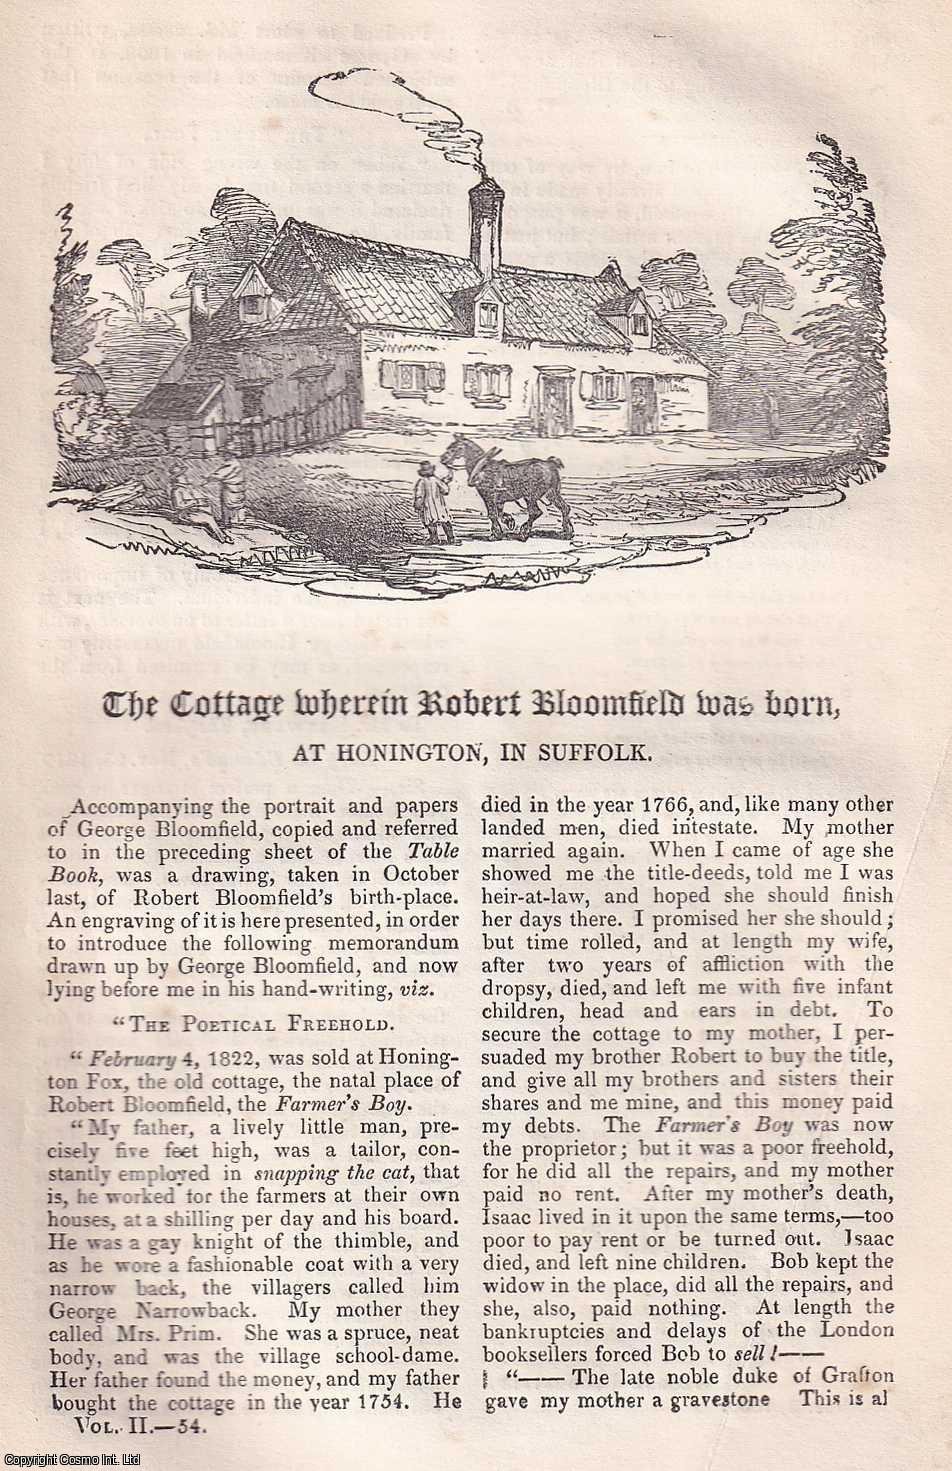 RURAL LIFE - Robert Bloomfield; The Cottage where he was born, ALONG WITH His Brother, George Bloomfield. An original article from Hone's Every Day Book, 1827.